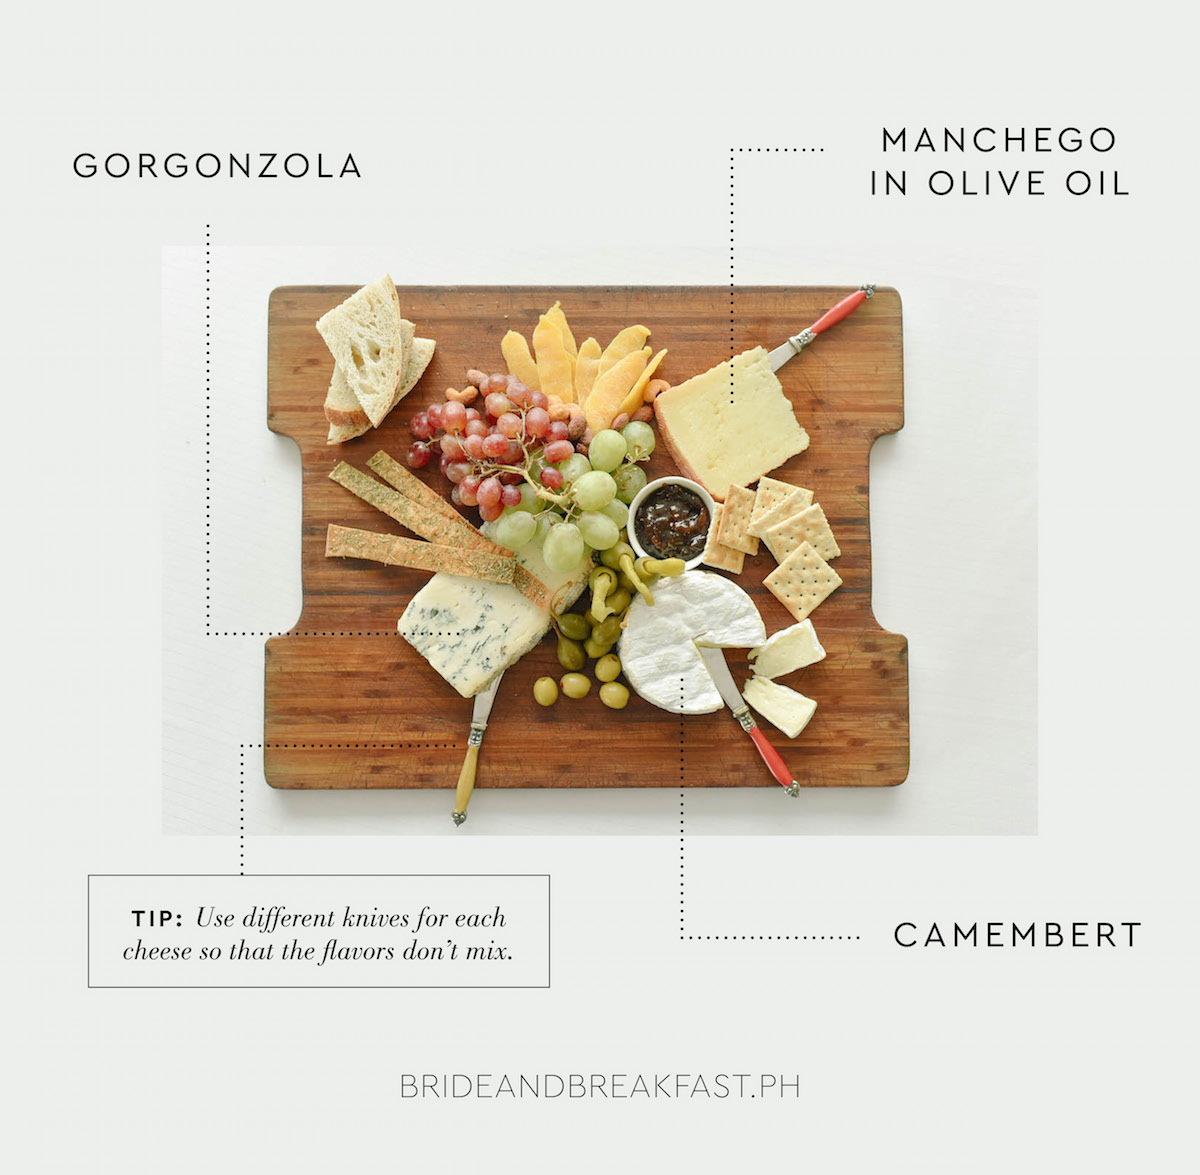 Gorgonzola Manchego in Olive Oil Camembert Tip: Use different knives for each cheese so that the flavors don't mix.